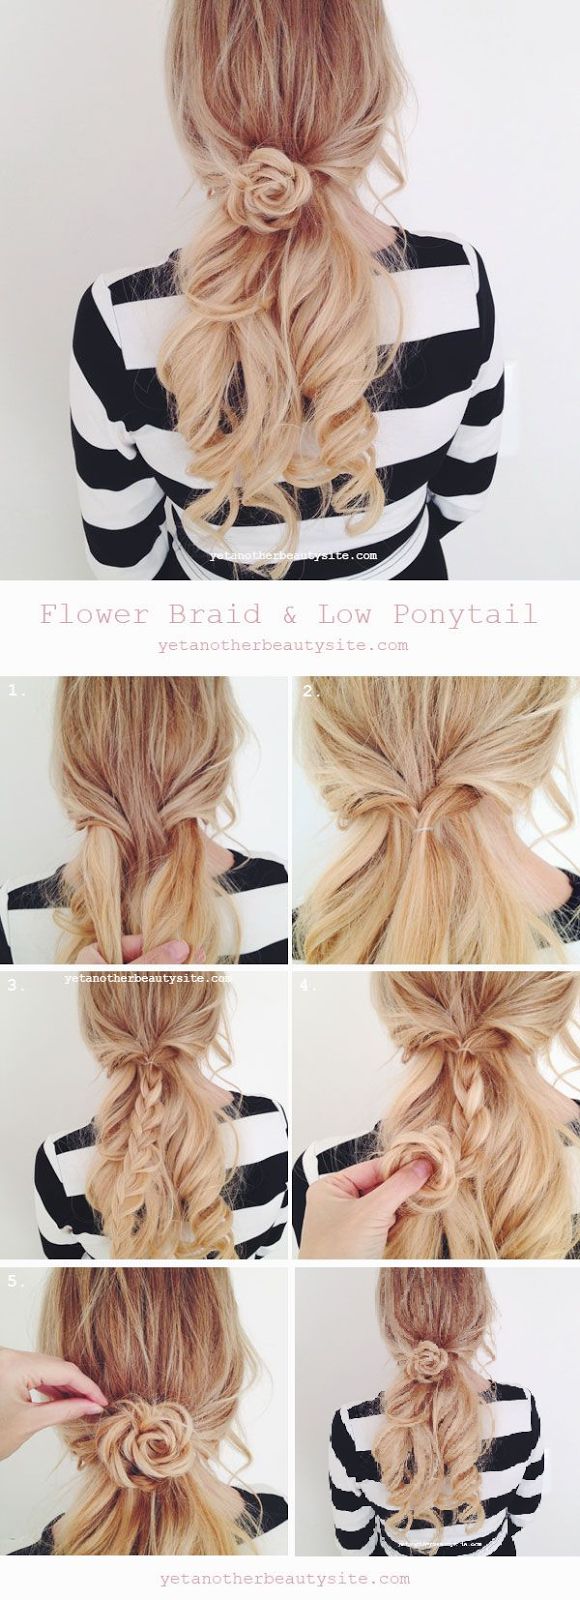 Wedding Hairstyle For Long Hair Braided Flower Hairstyle